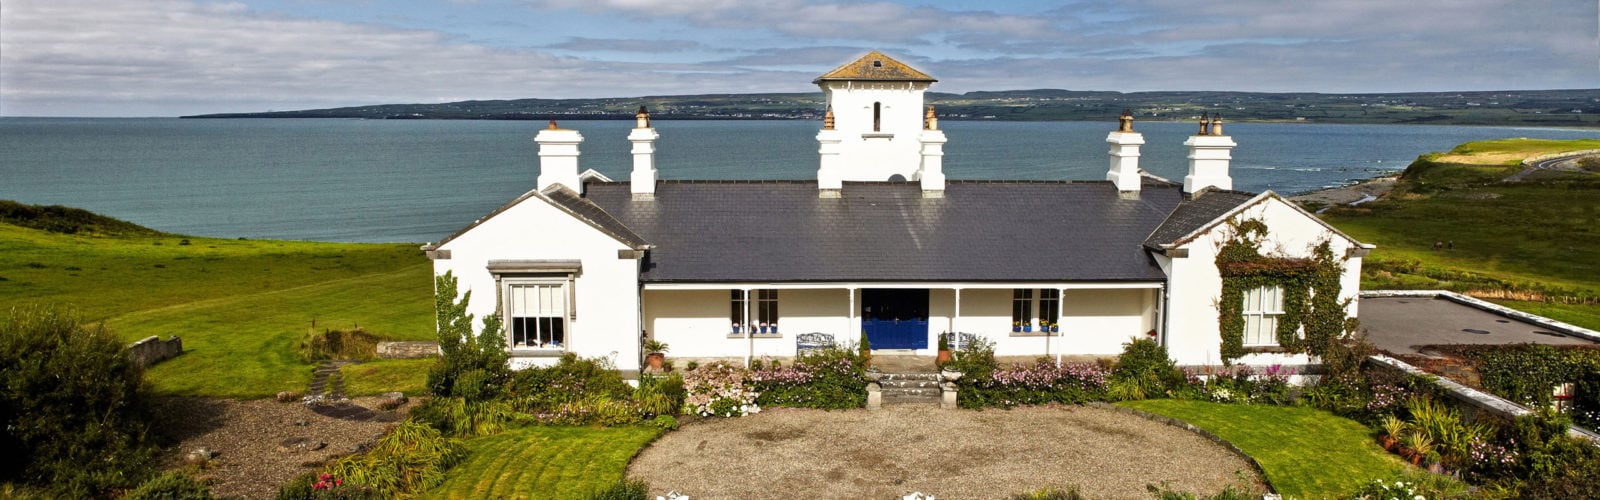 Moy House - Luxury Hotel In Galway and the West Coast | Jacada Travel